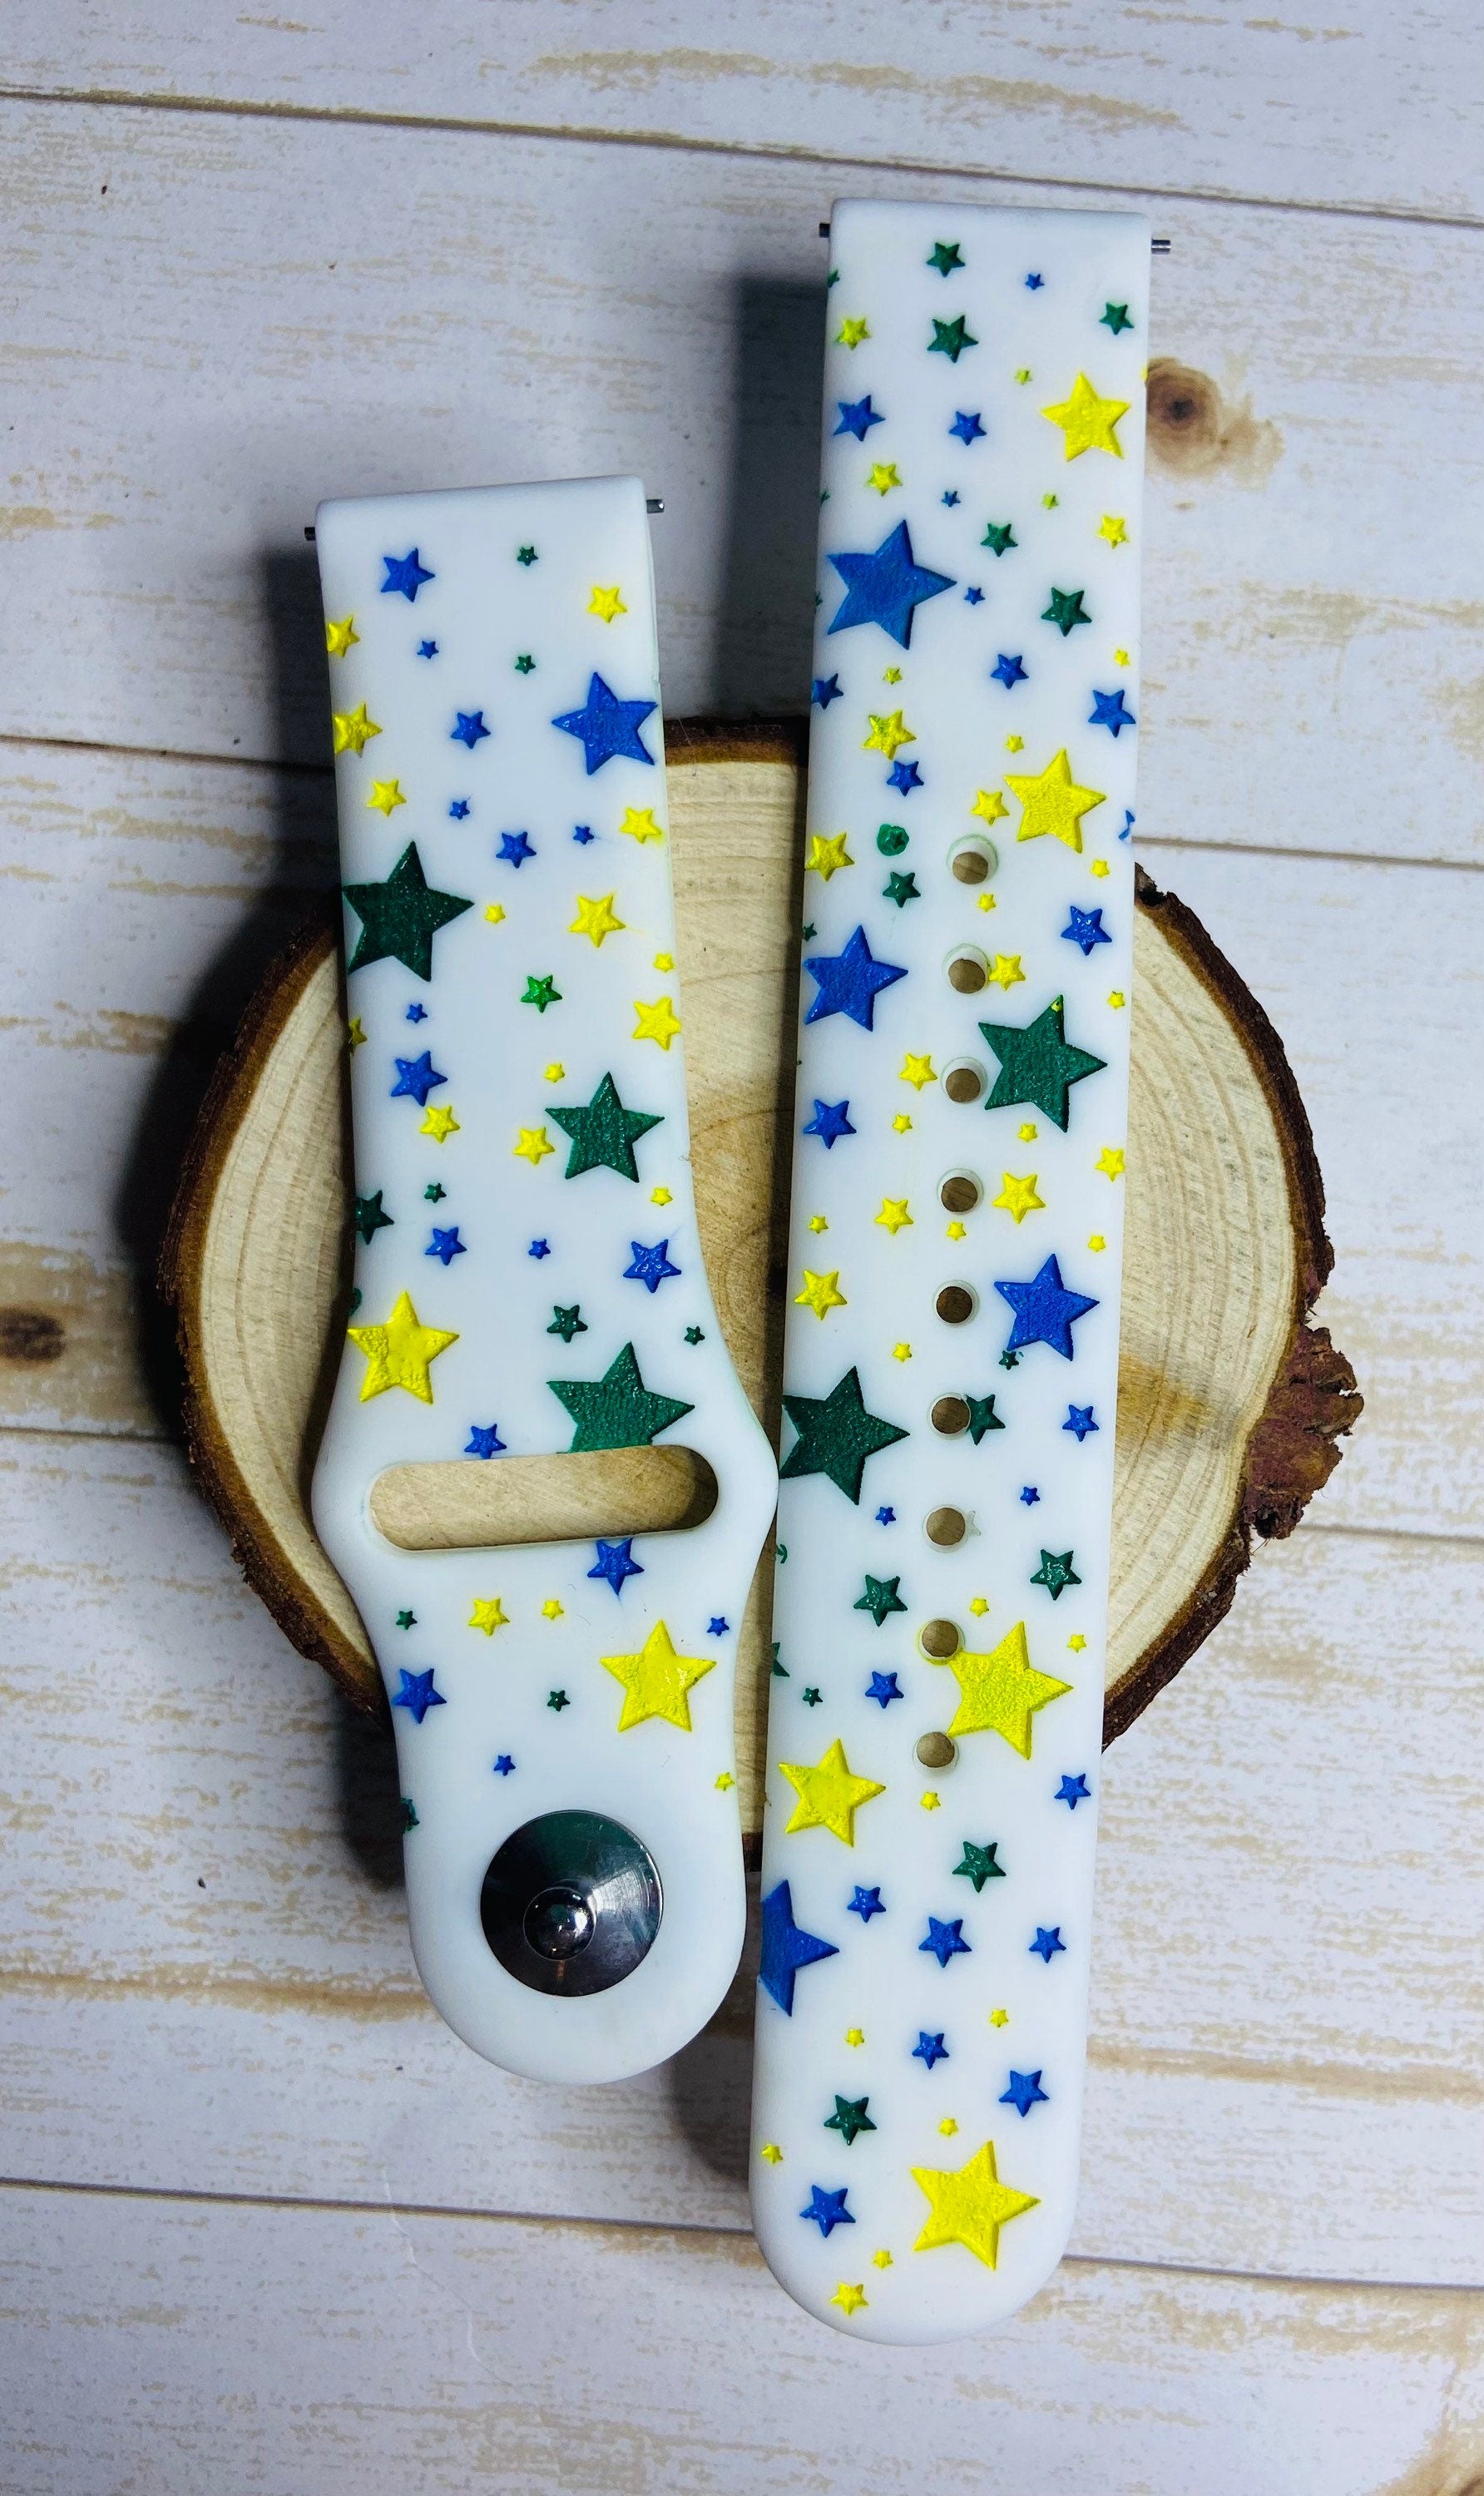 Star band, engraved Apple Watch band, Samsung, Fitbit versa 2, Multiple stars, colored stars, add name with stars